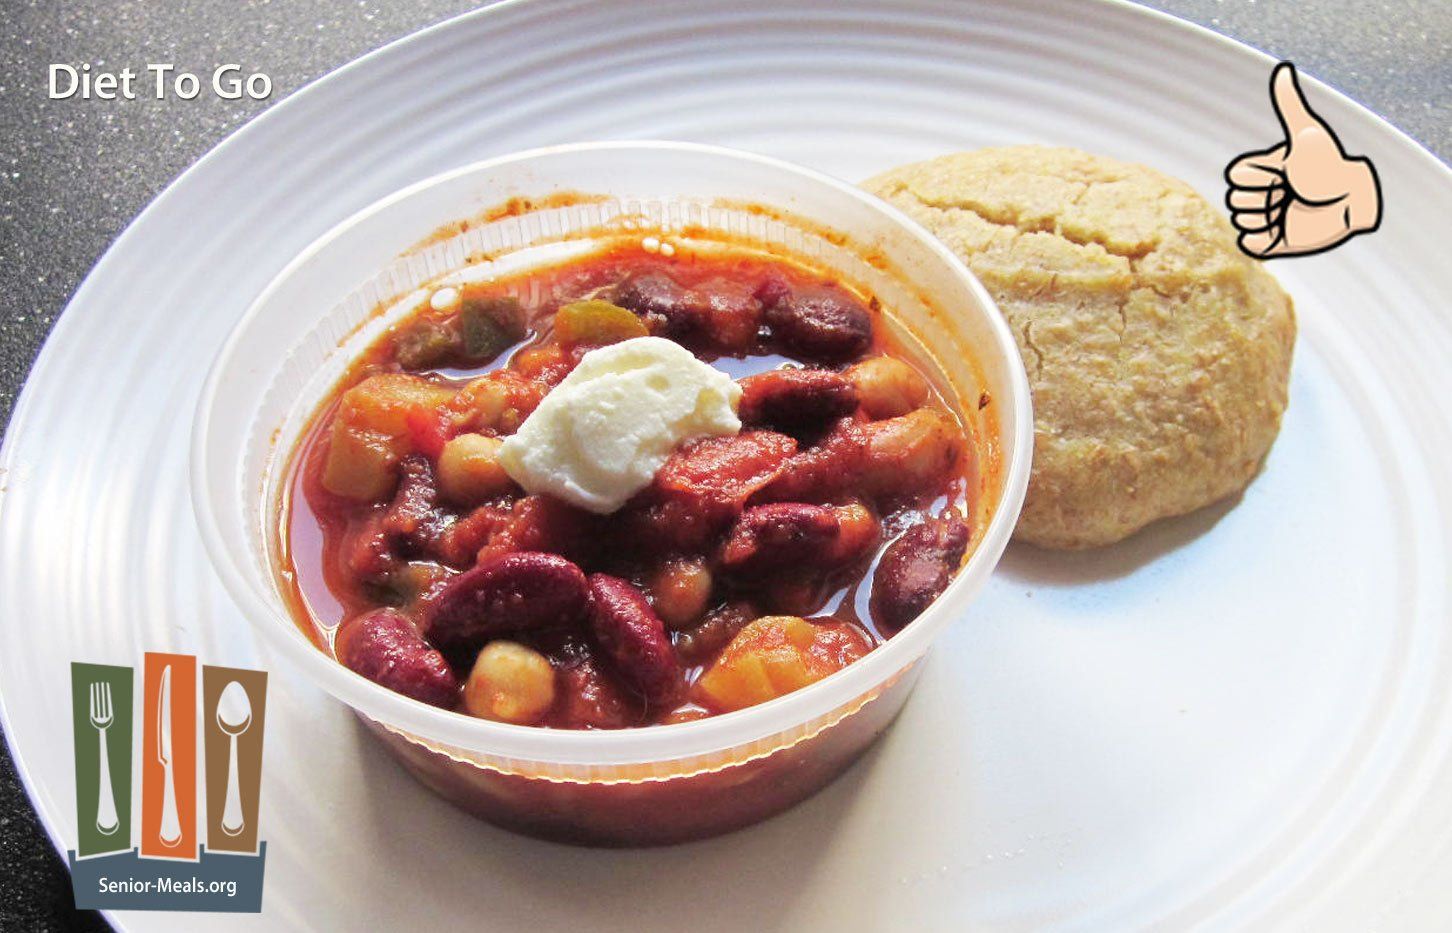 Chili with a Biscuit and Sour Cream